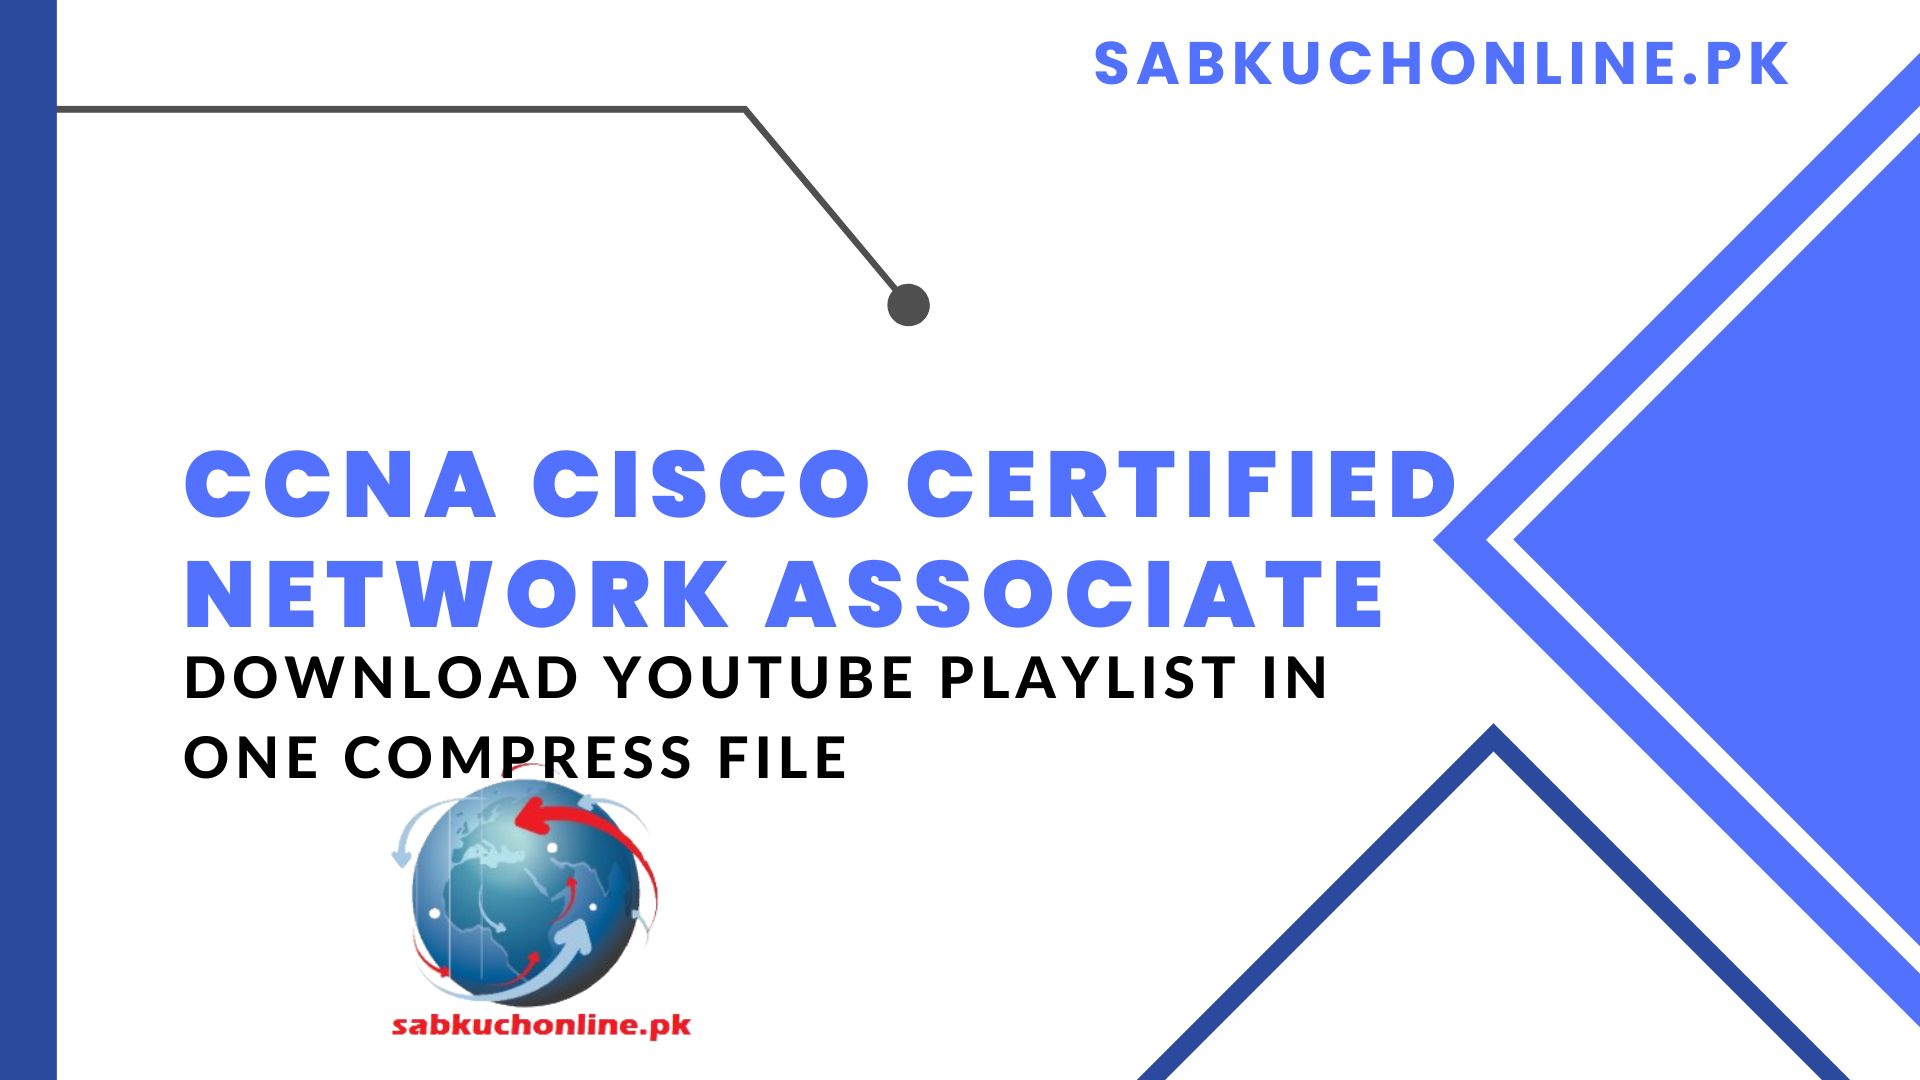 CCNA CISCO Certified Network Associate Video Course Download YouTube Playlist in one compress file